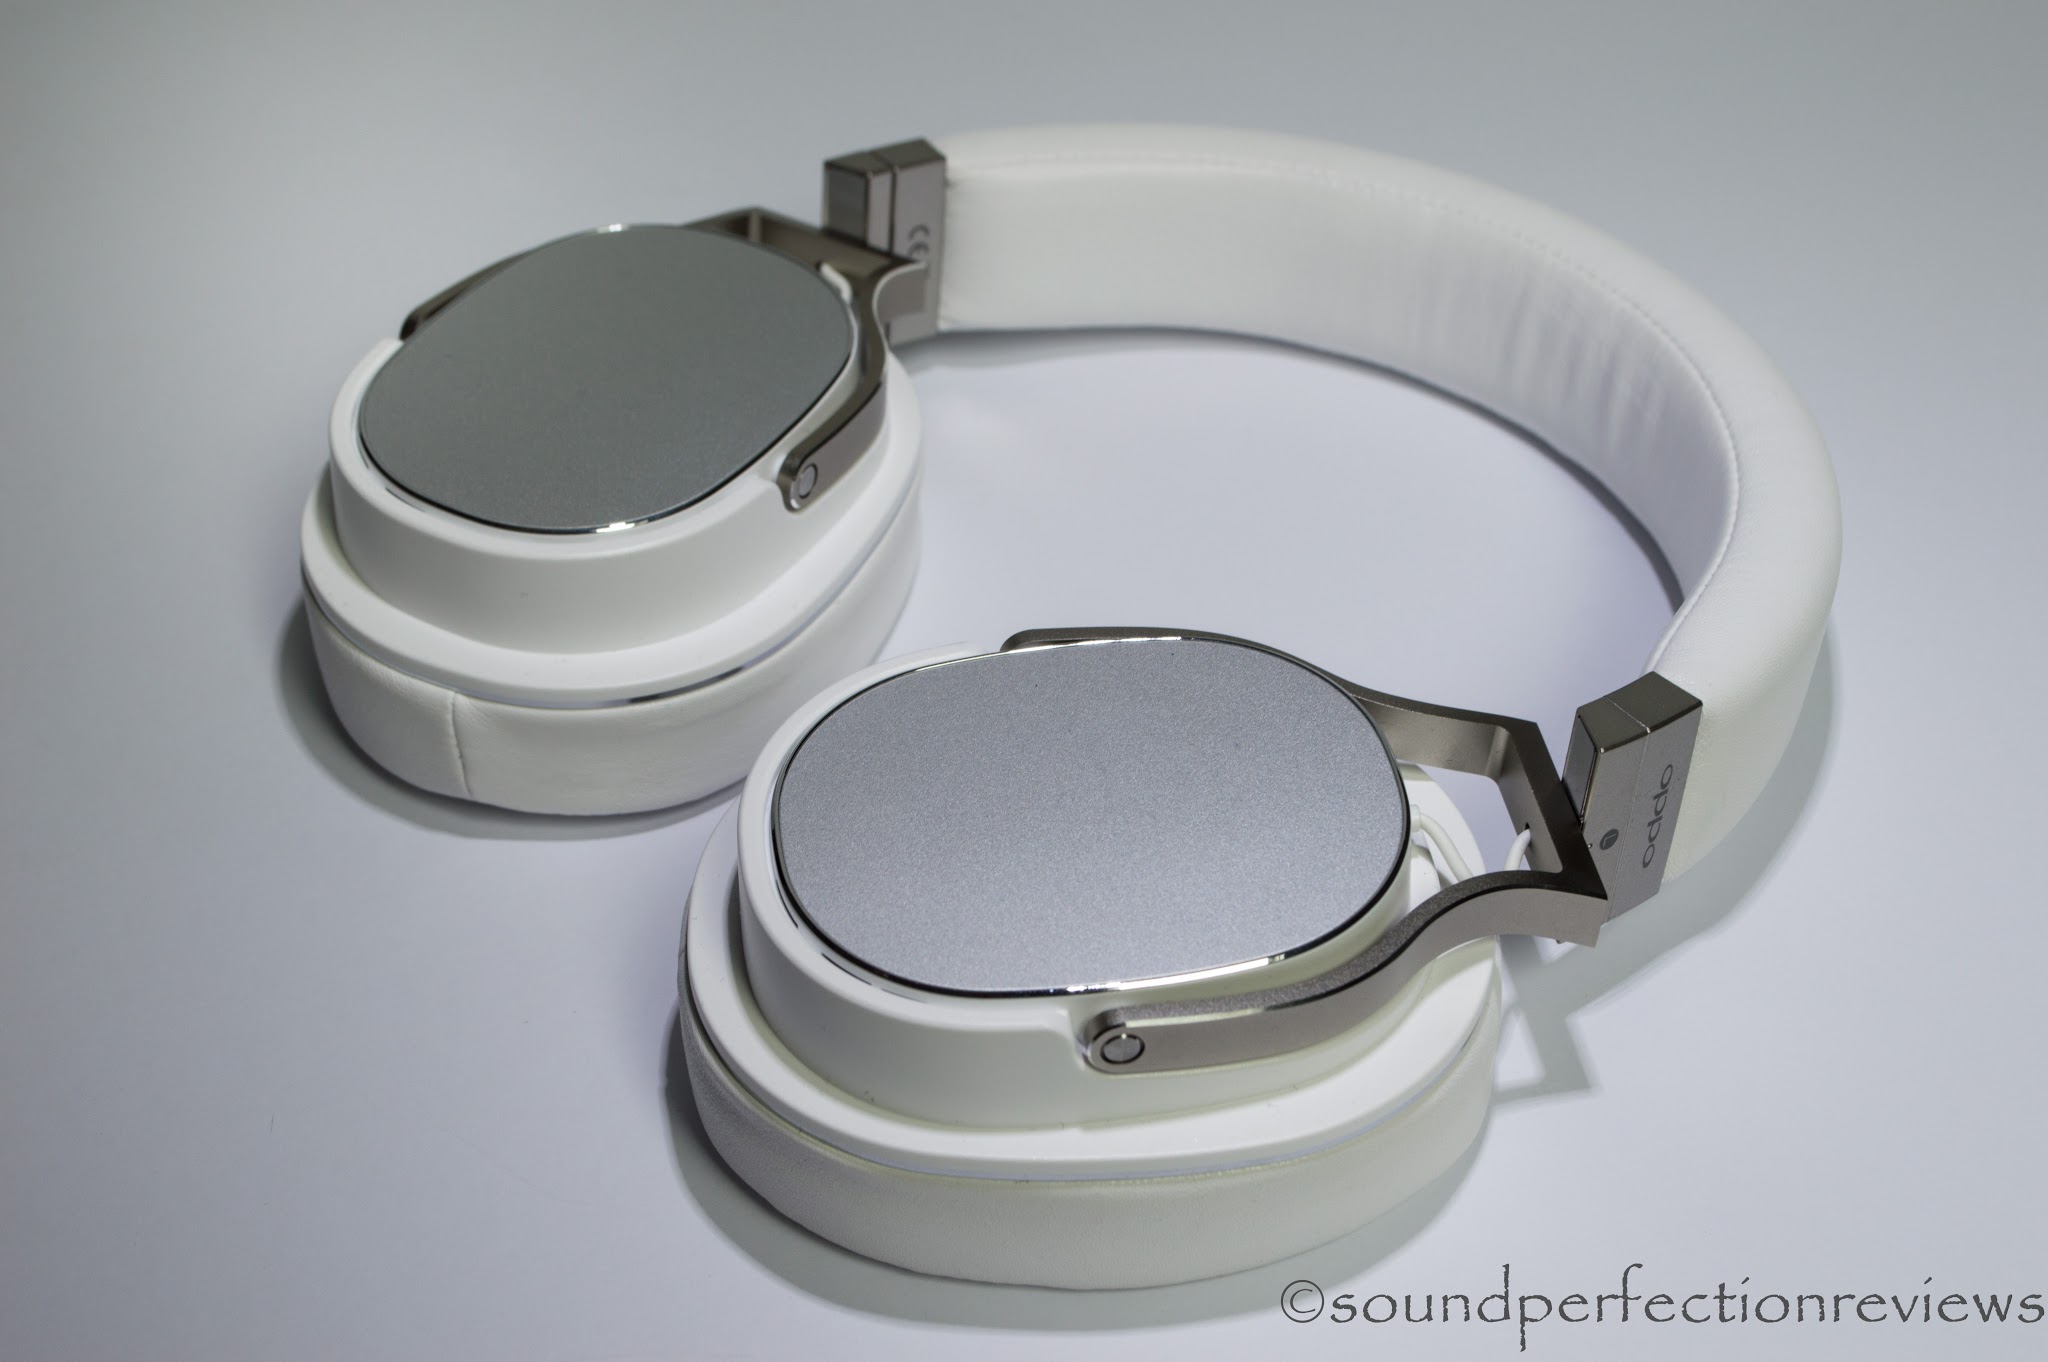 Review: Oppo PM-3 (Portable Planar Magnetic Headphones)